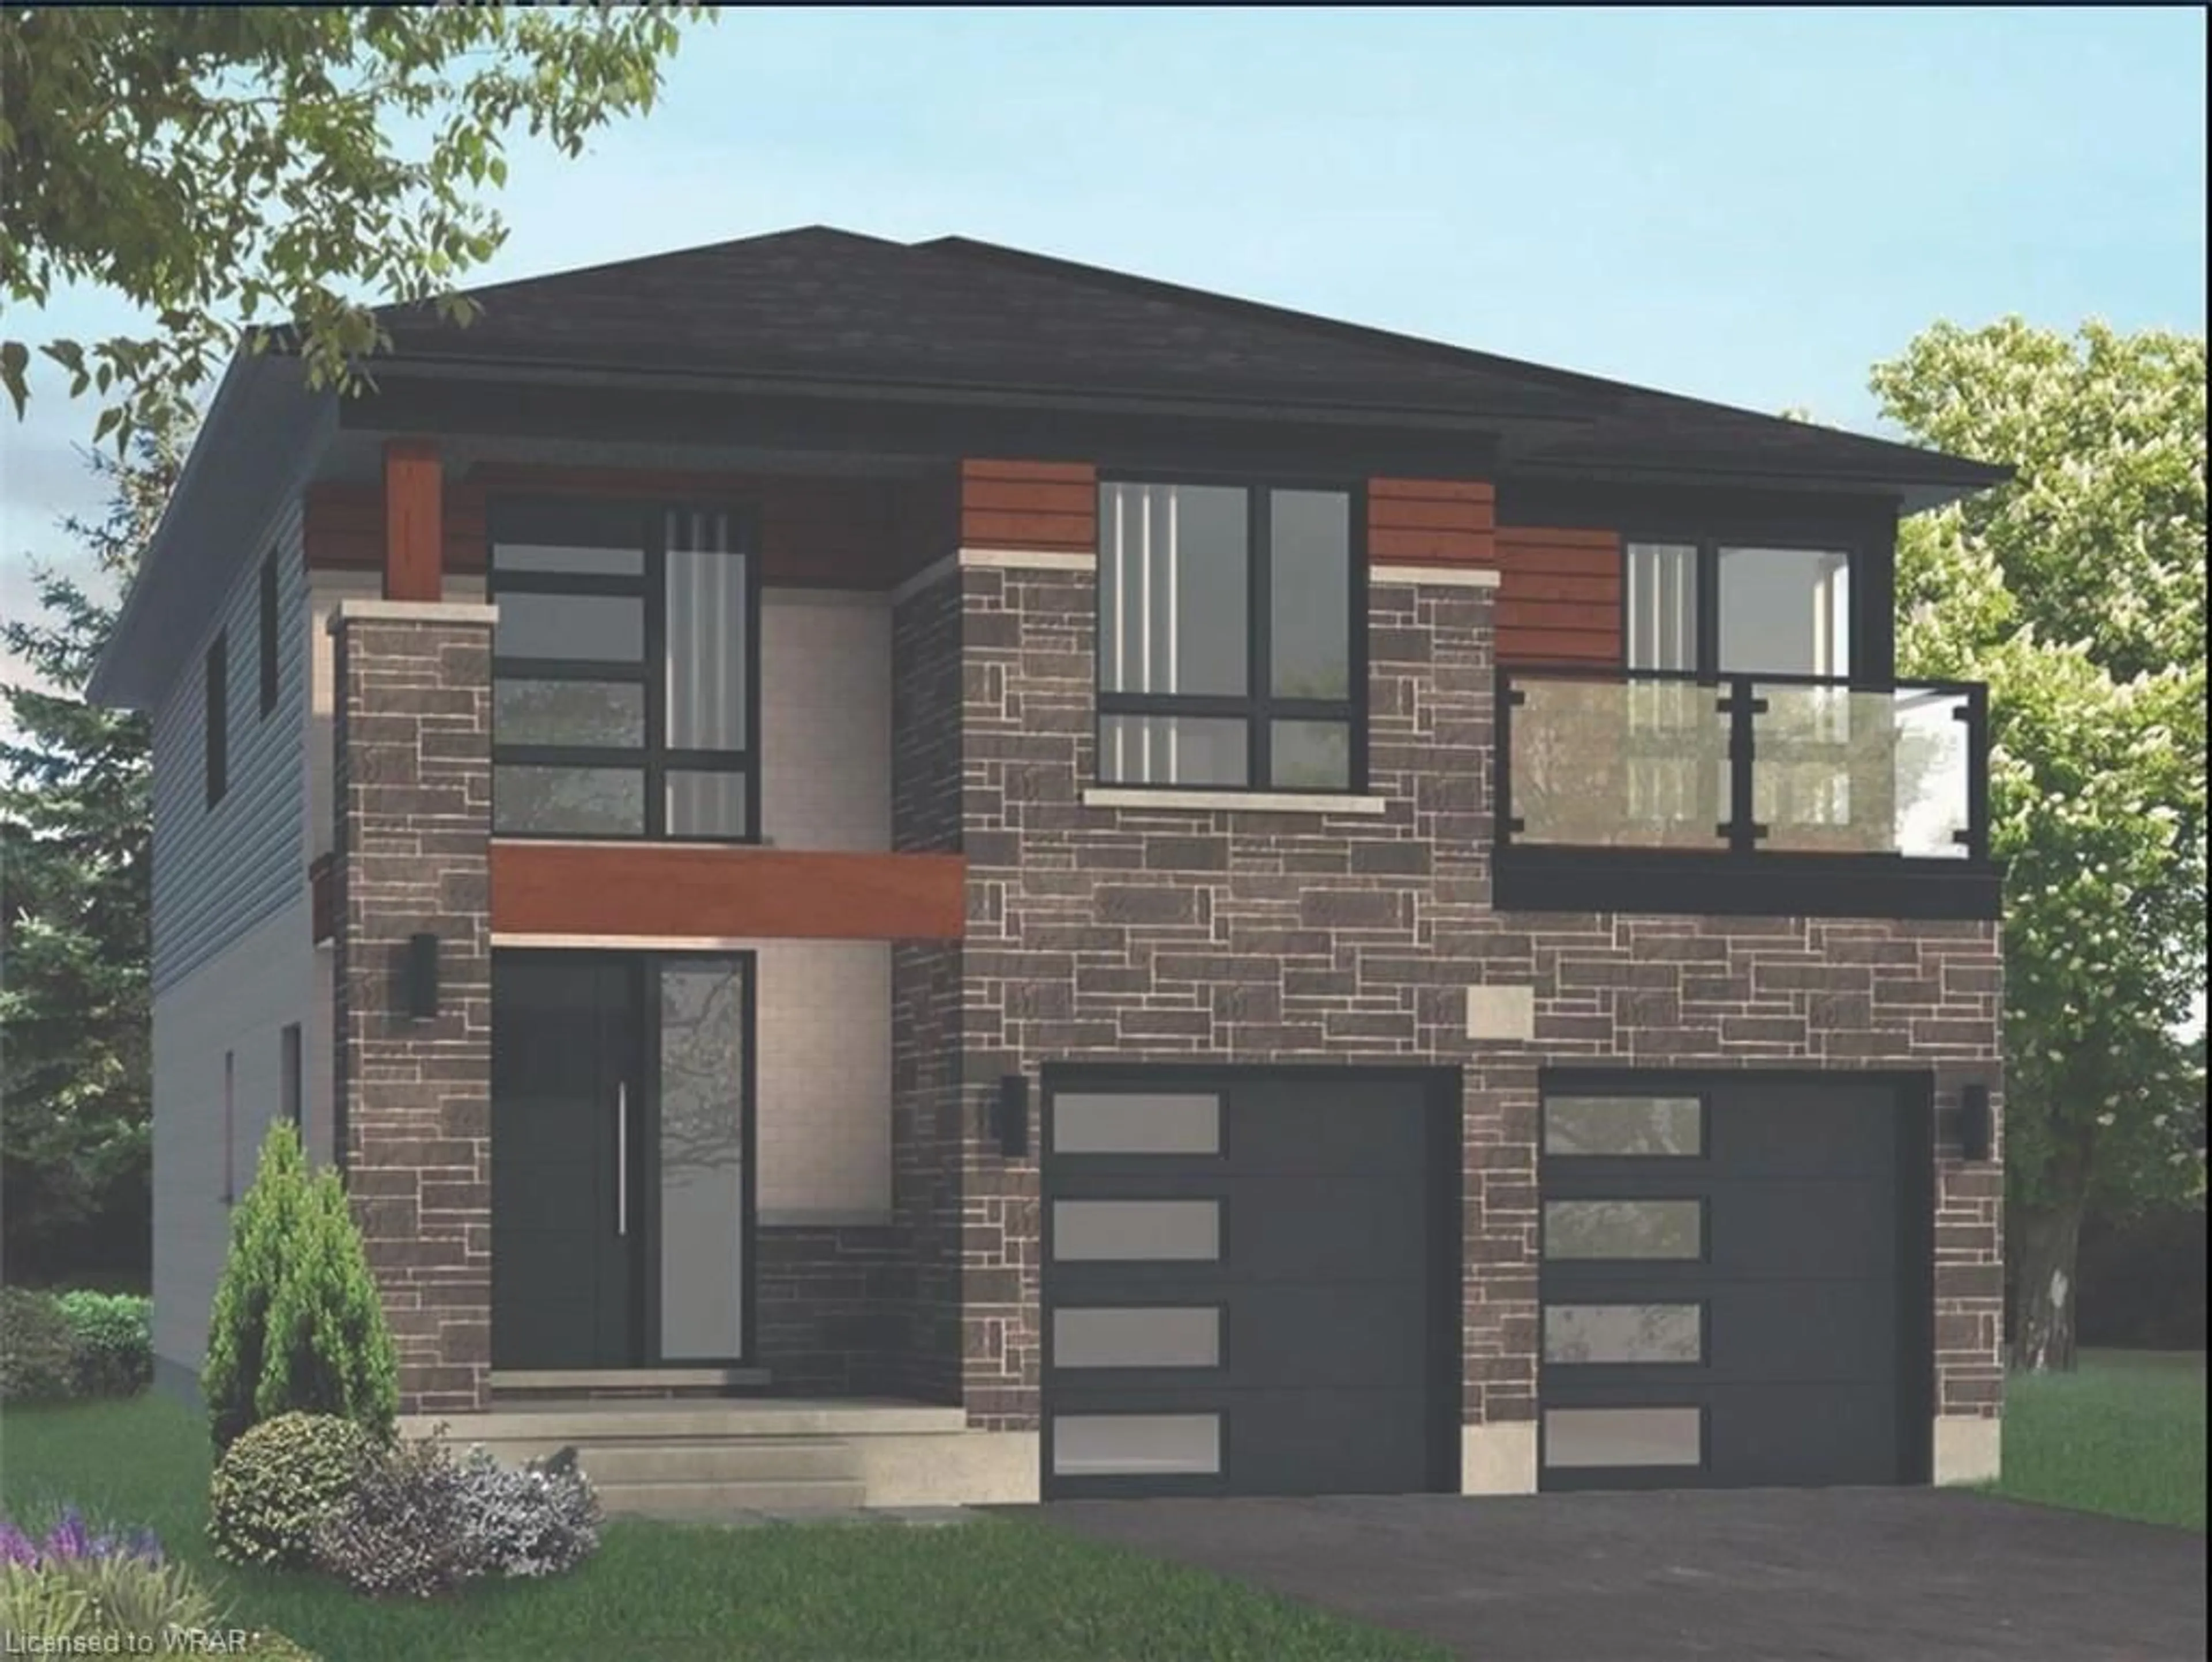 Home with brick exterior material for 97 Shaded Creek Dr #Lot 0016, Kitchener Ontario N2P 0K7